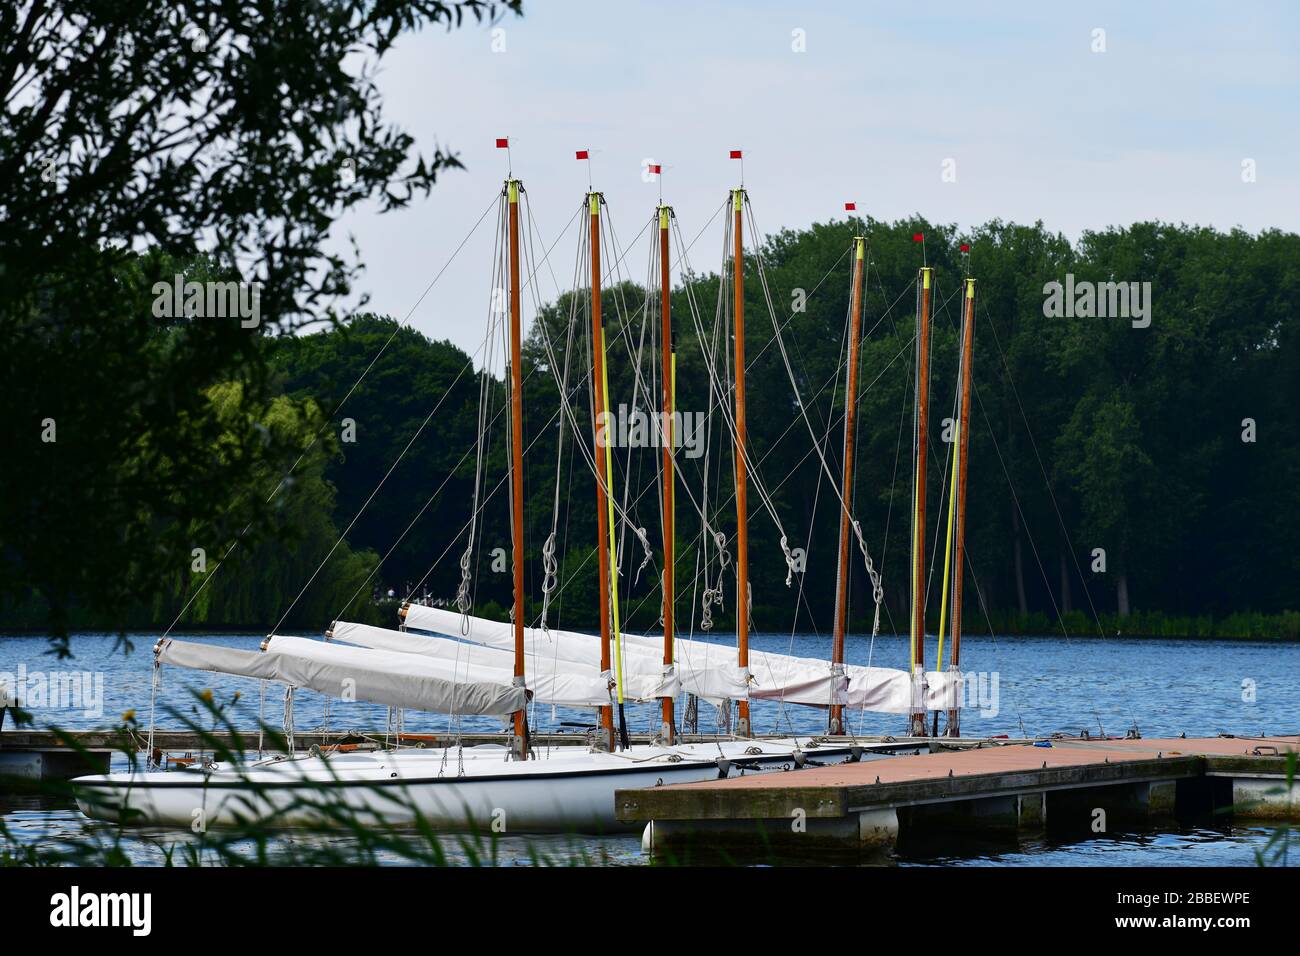 Seven identical sail boats lined up, sails down, at the dock in the Kralingse Plas in Rotterdam Stock Photo